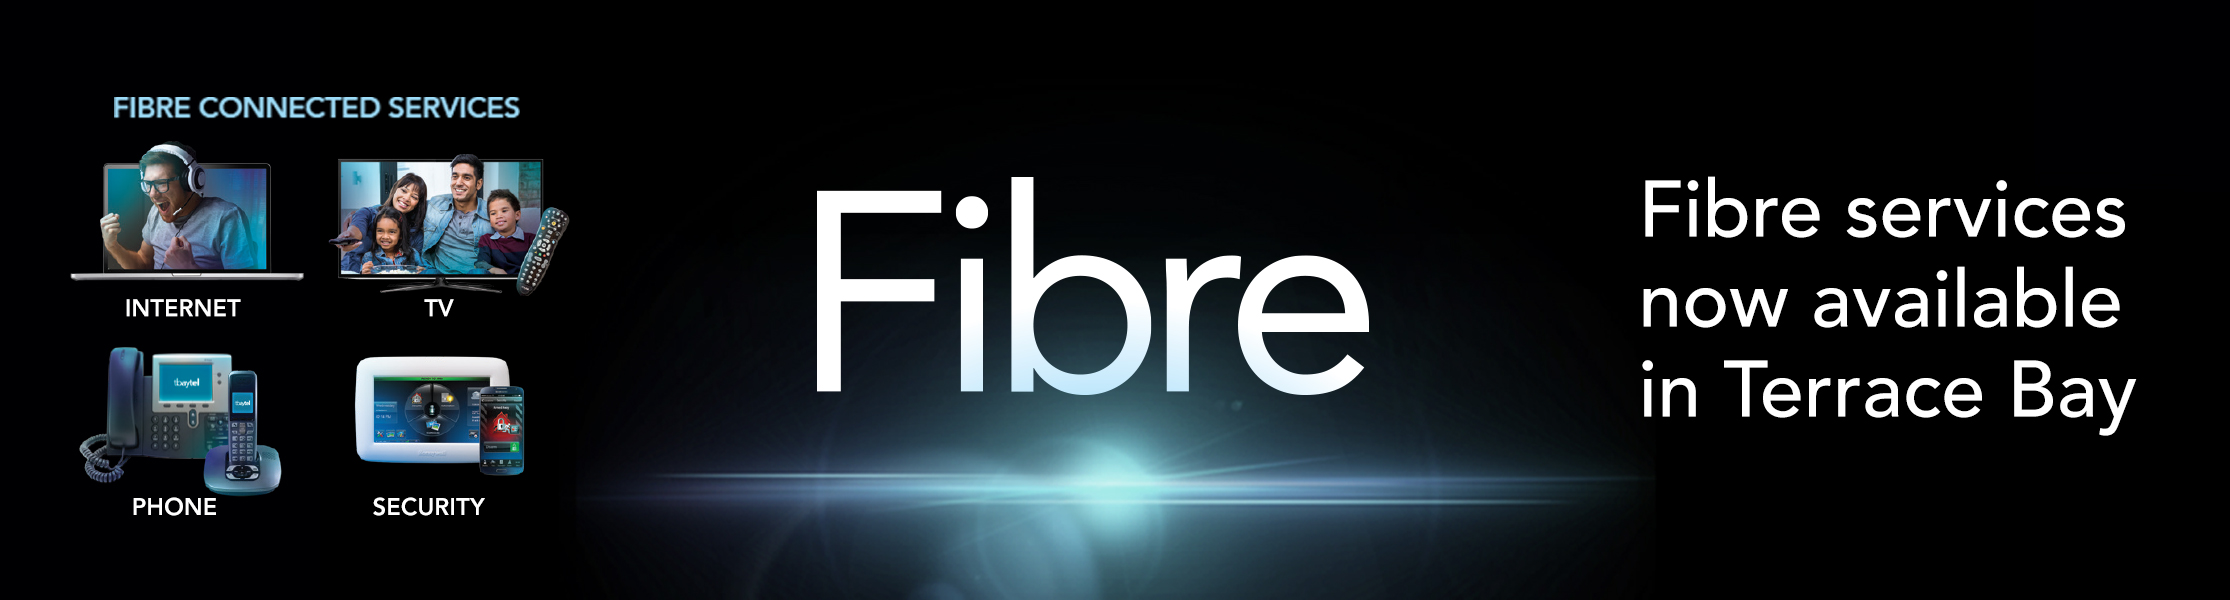 Fibre is available in Terrace Bay